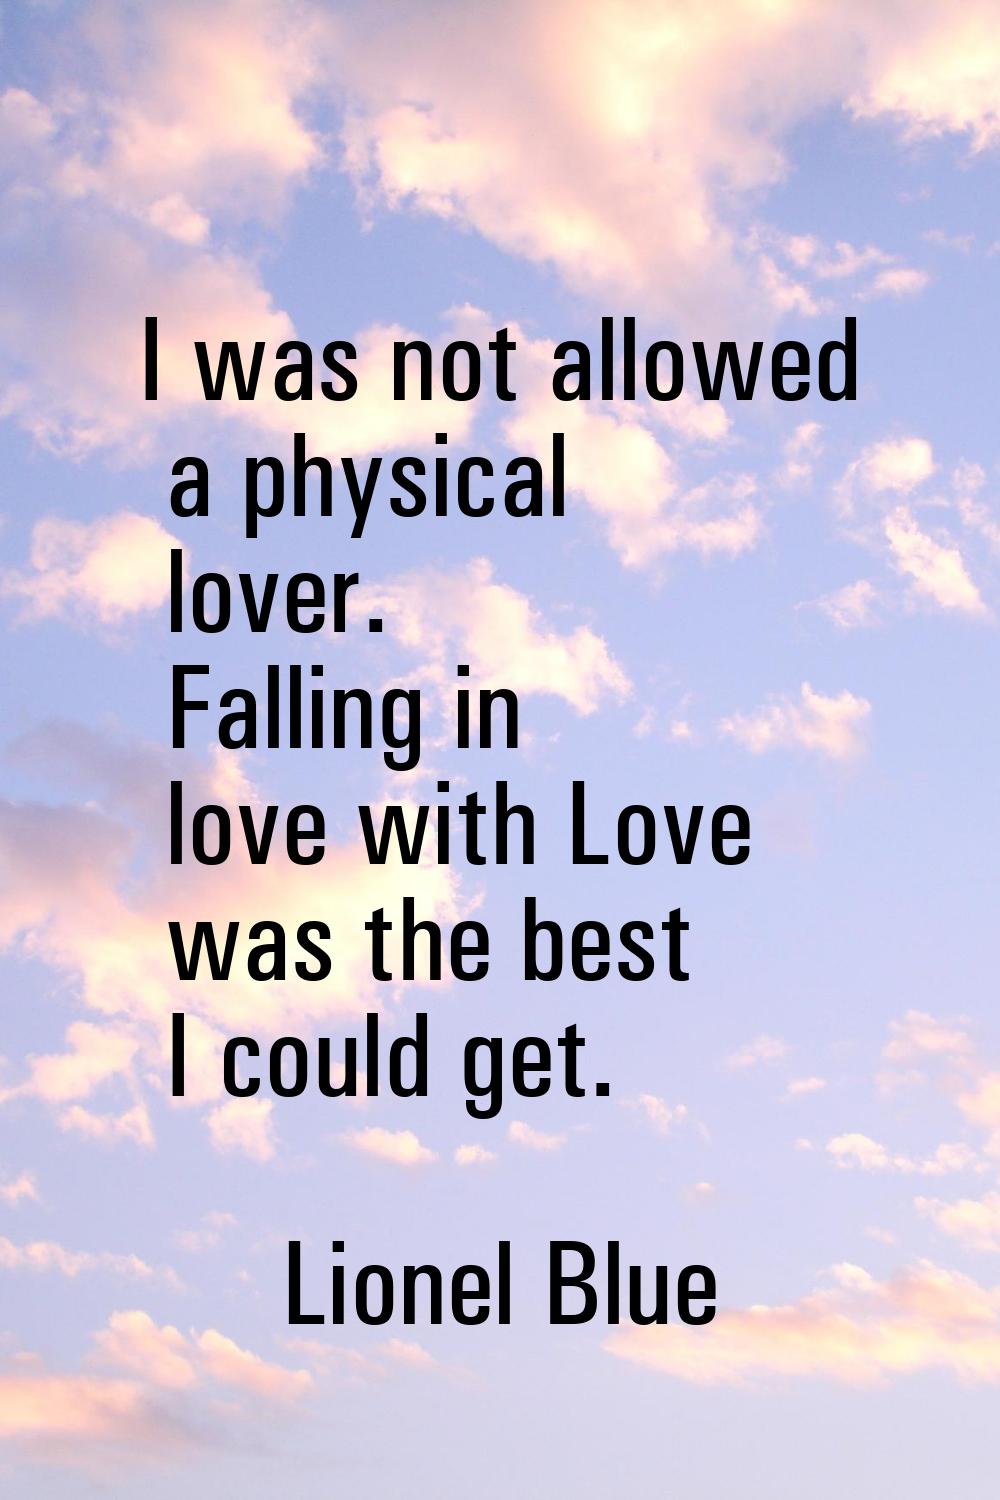 I was not allowed a physical lover. Falling in love with Love was the best I could get.